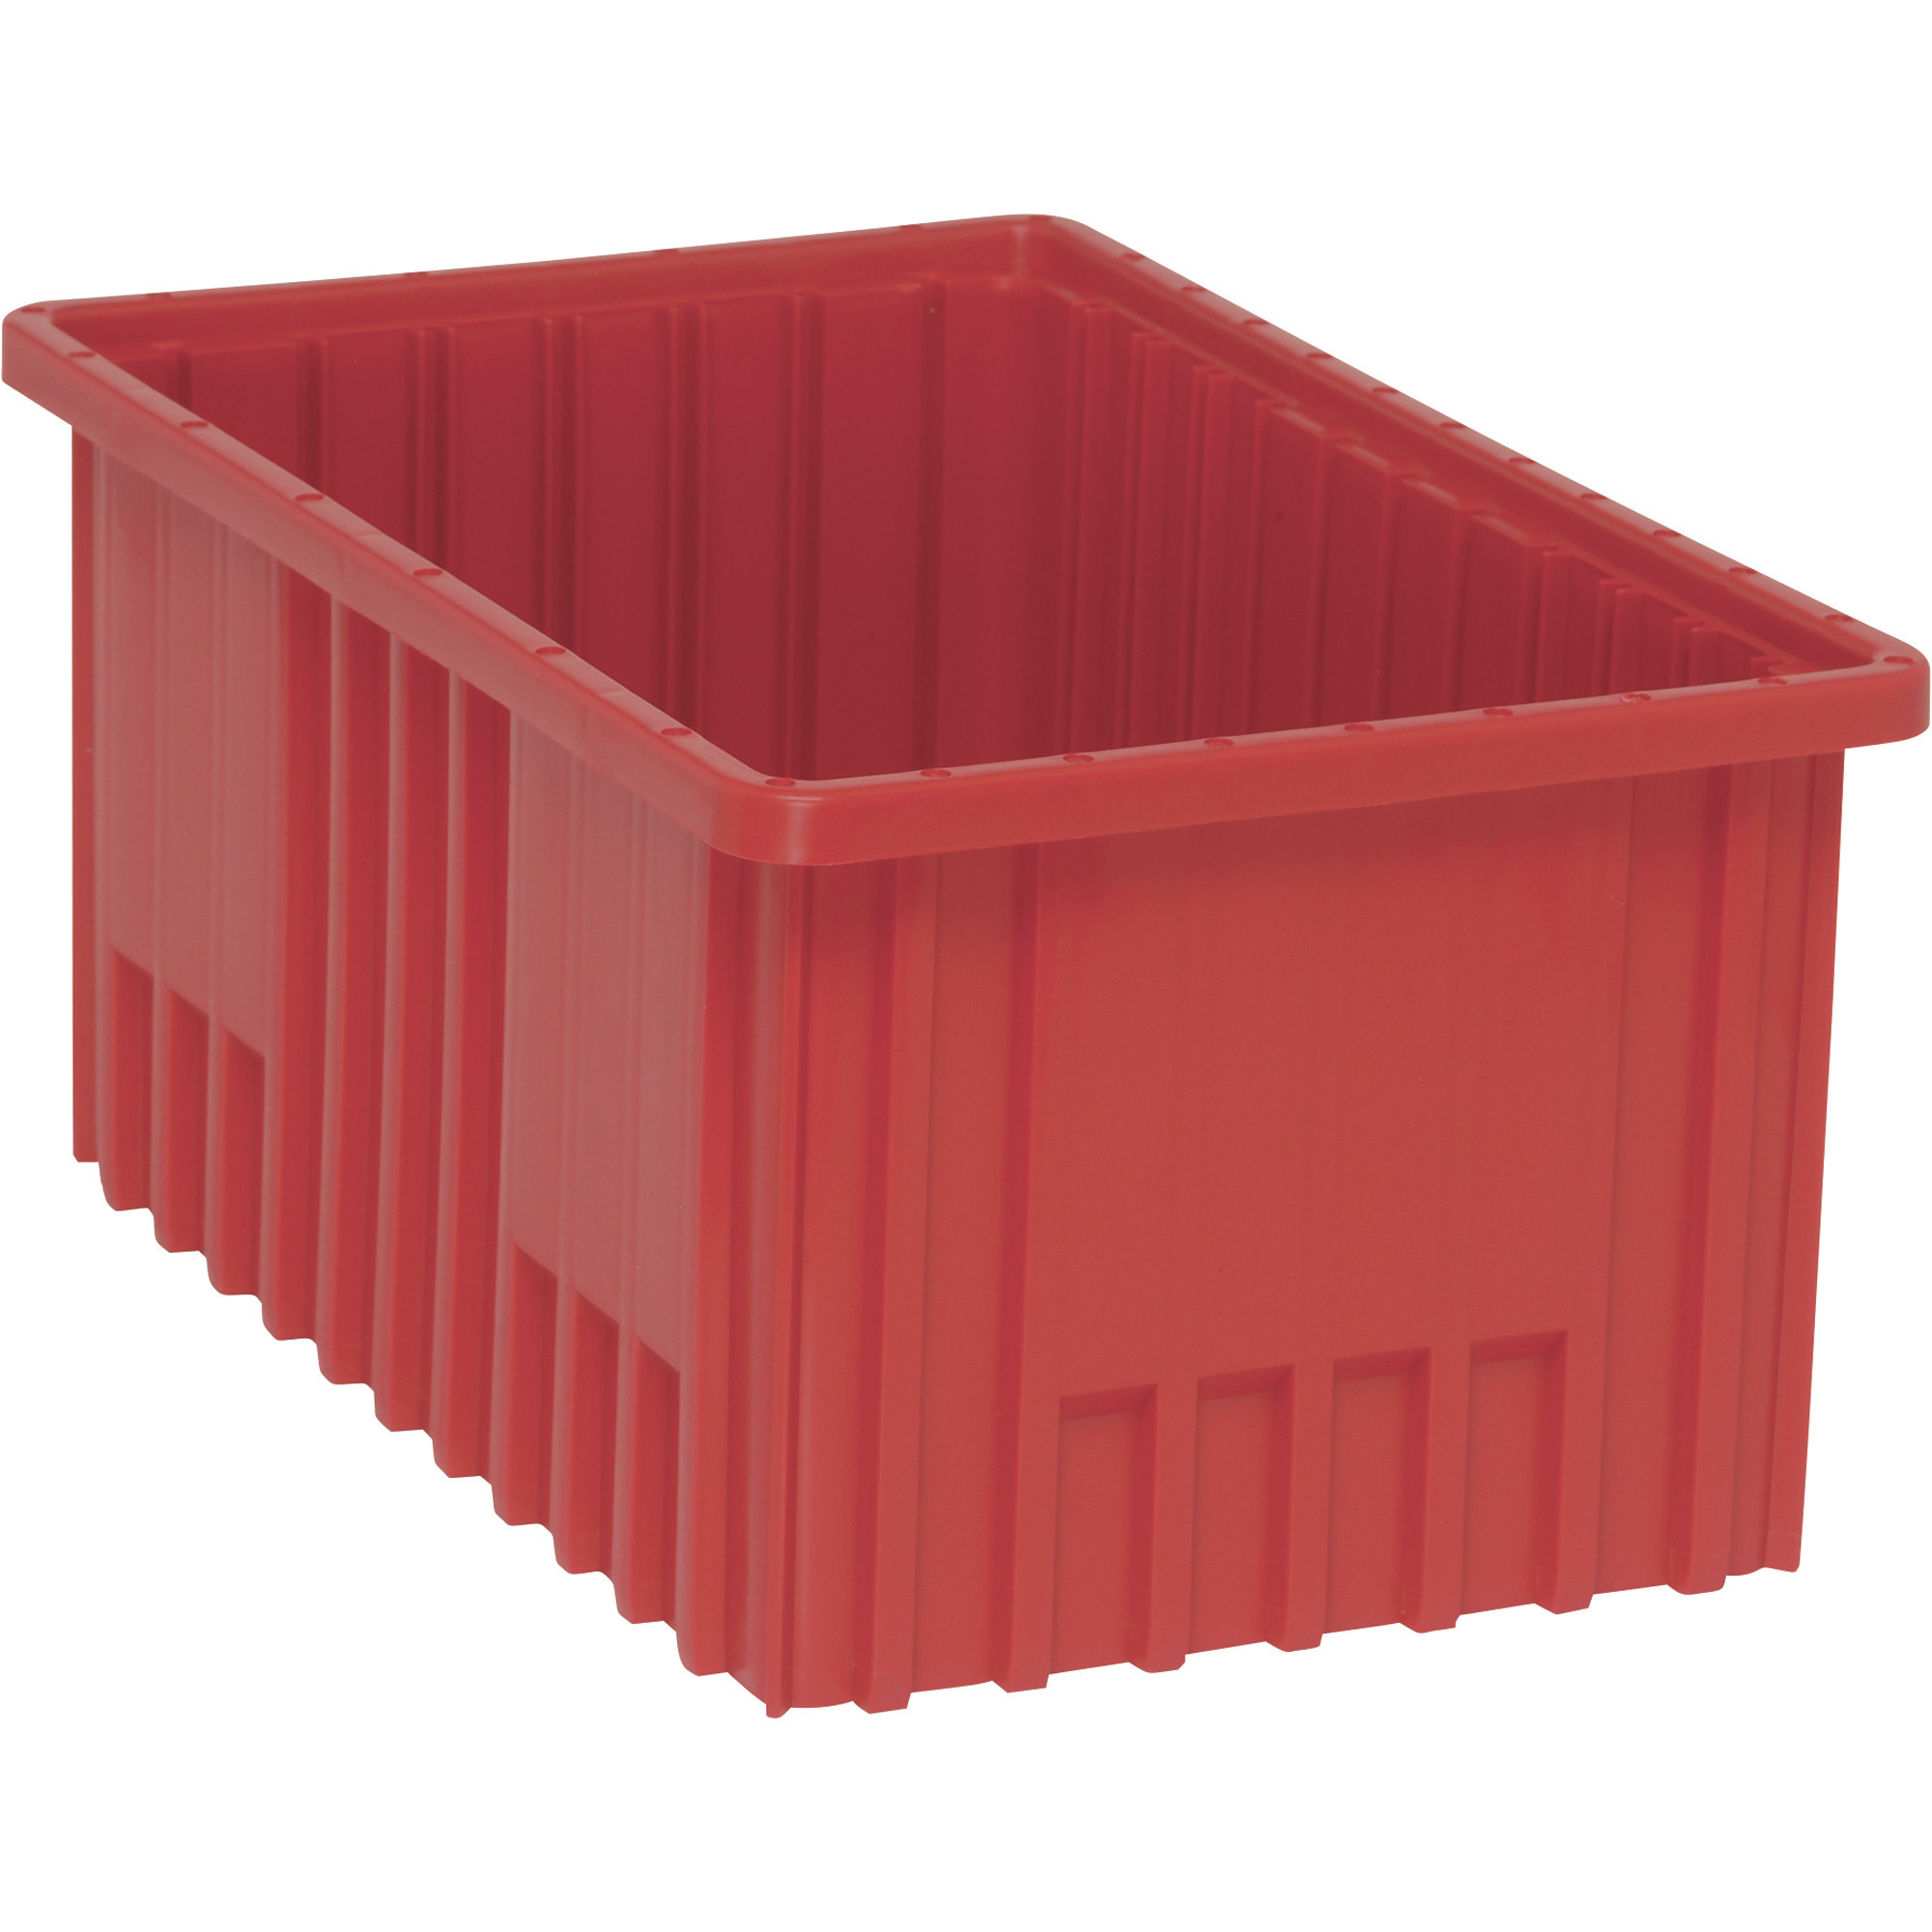 Storage Dividable Grid Container — 8-Pack, 16 1/2Inch L x 10 7/8Inch W x 8Inch H, Red, Model - Quantum DG92080RD